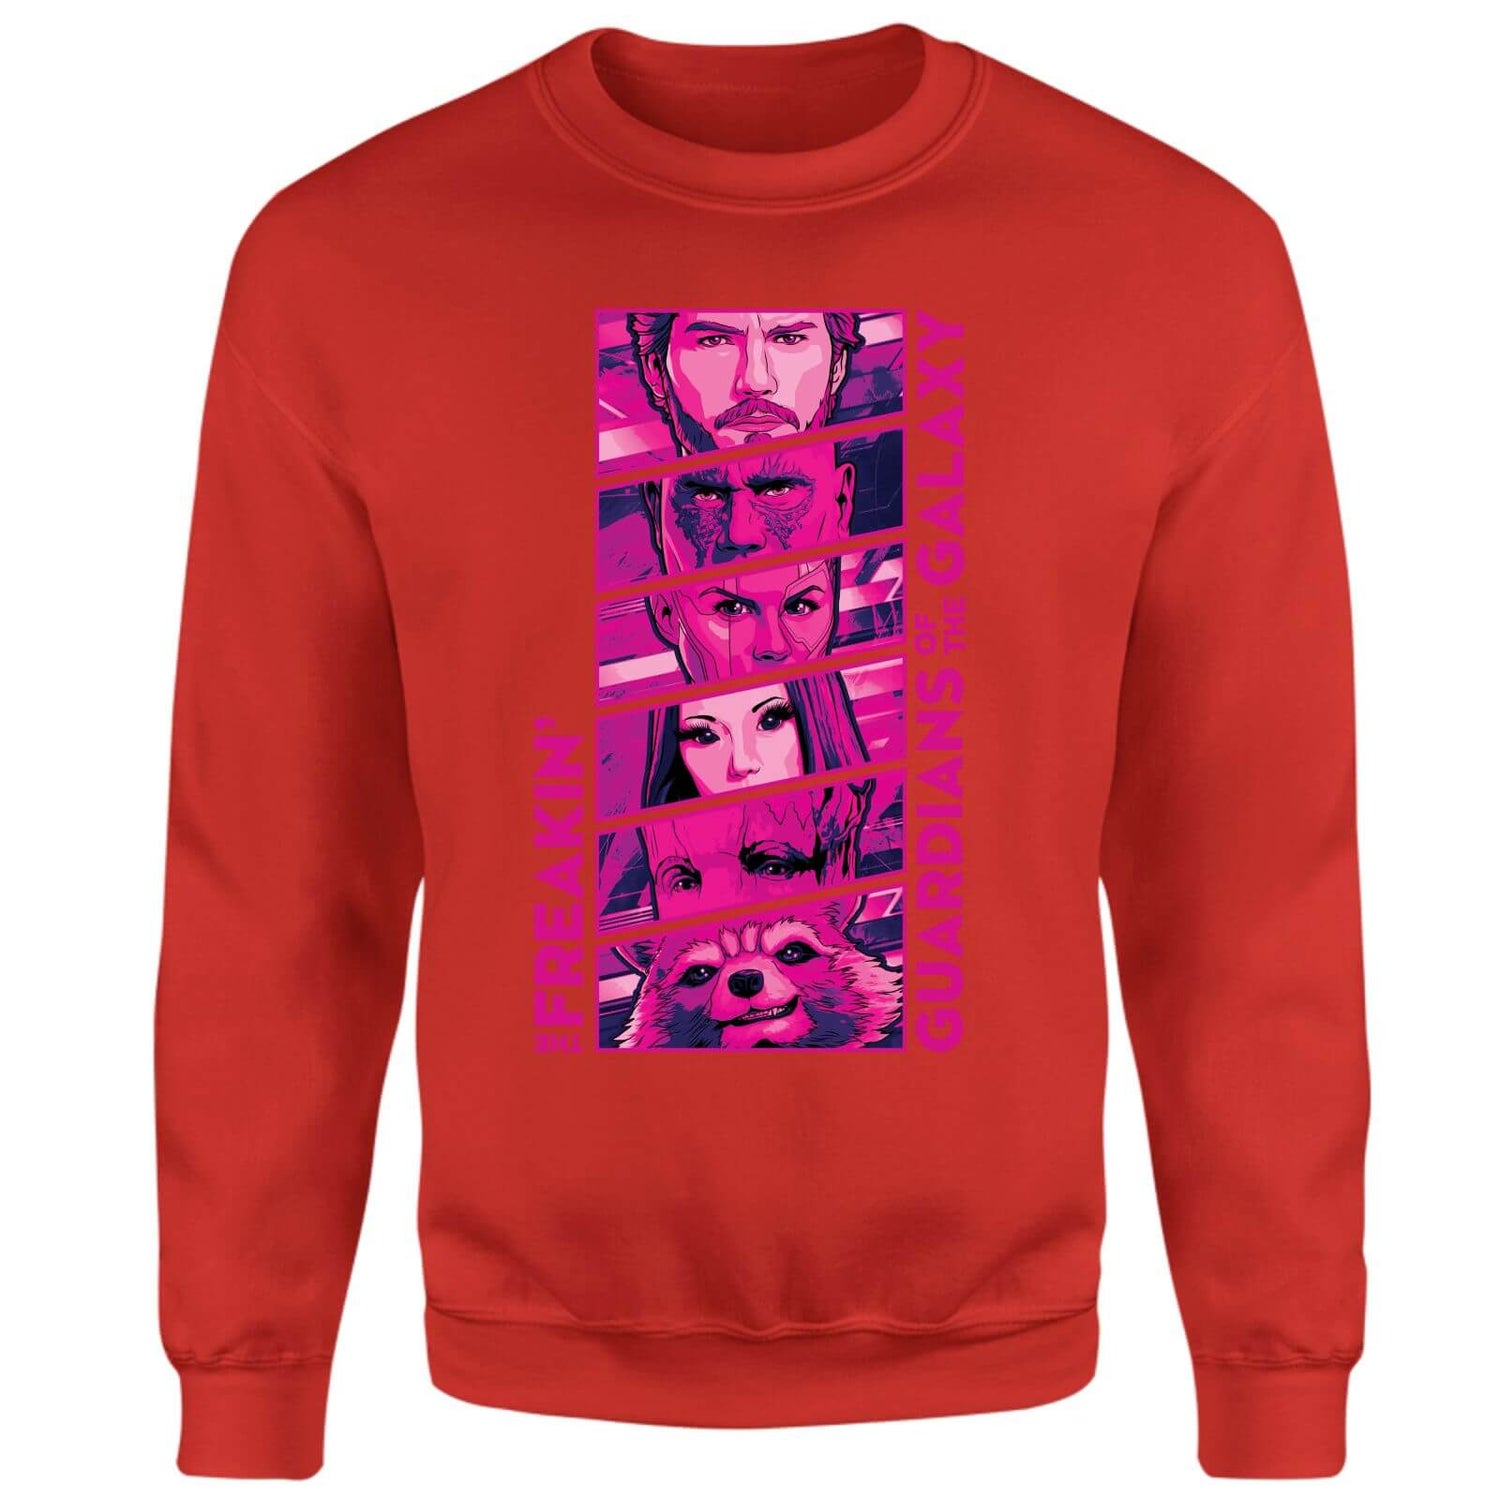 Guardians of the Galaxy Faces Sweatshirt - Red